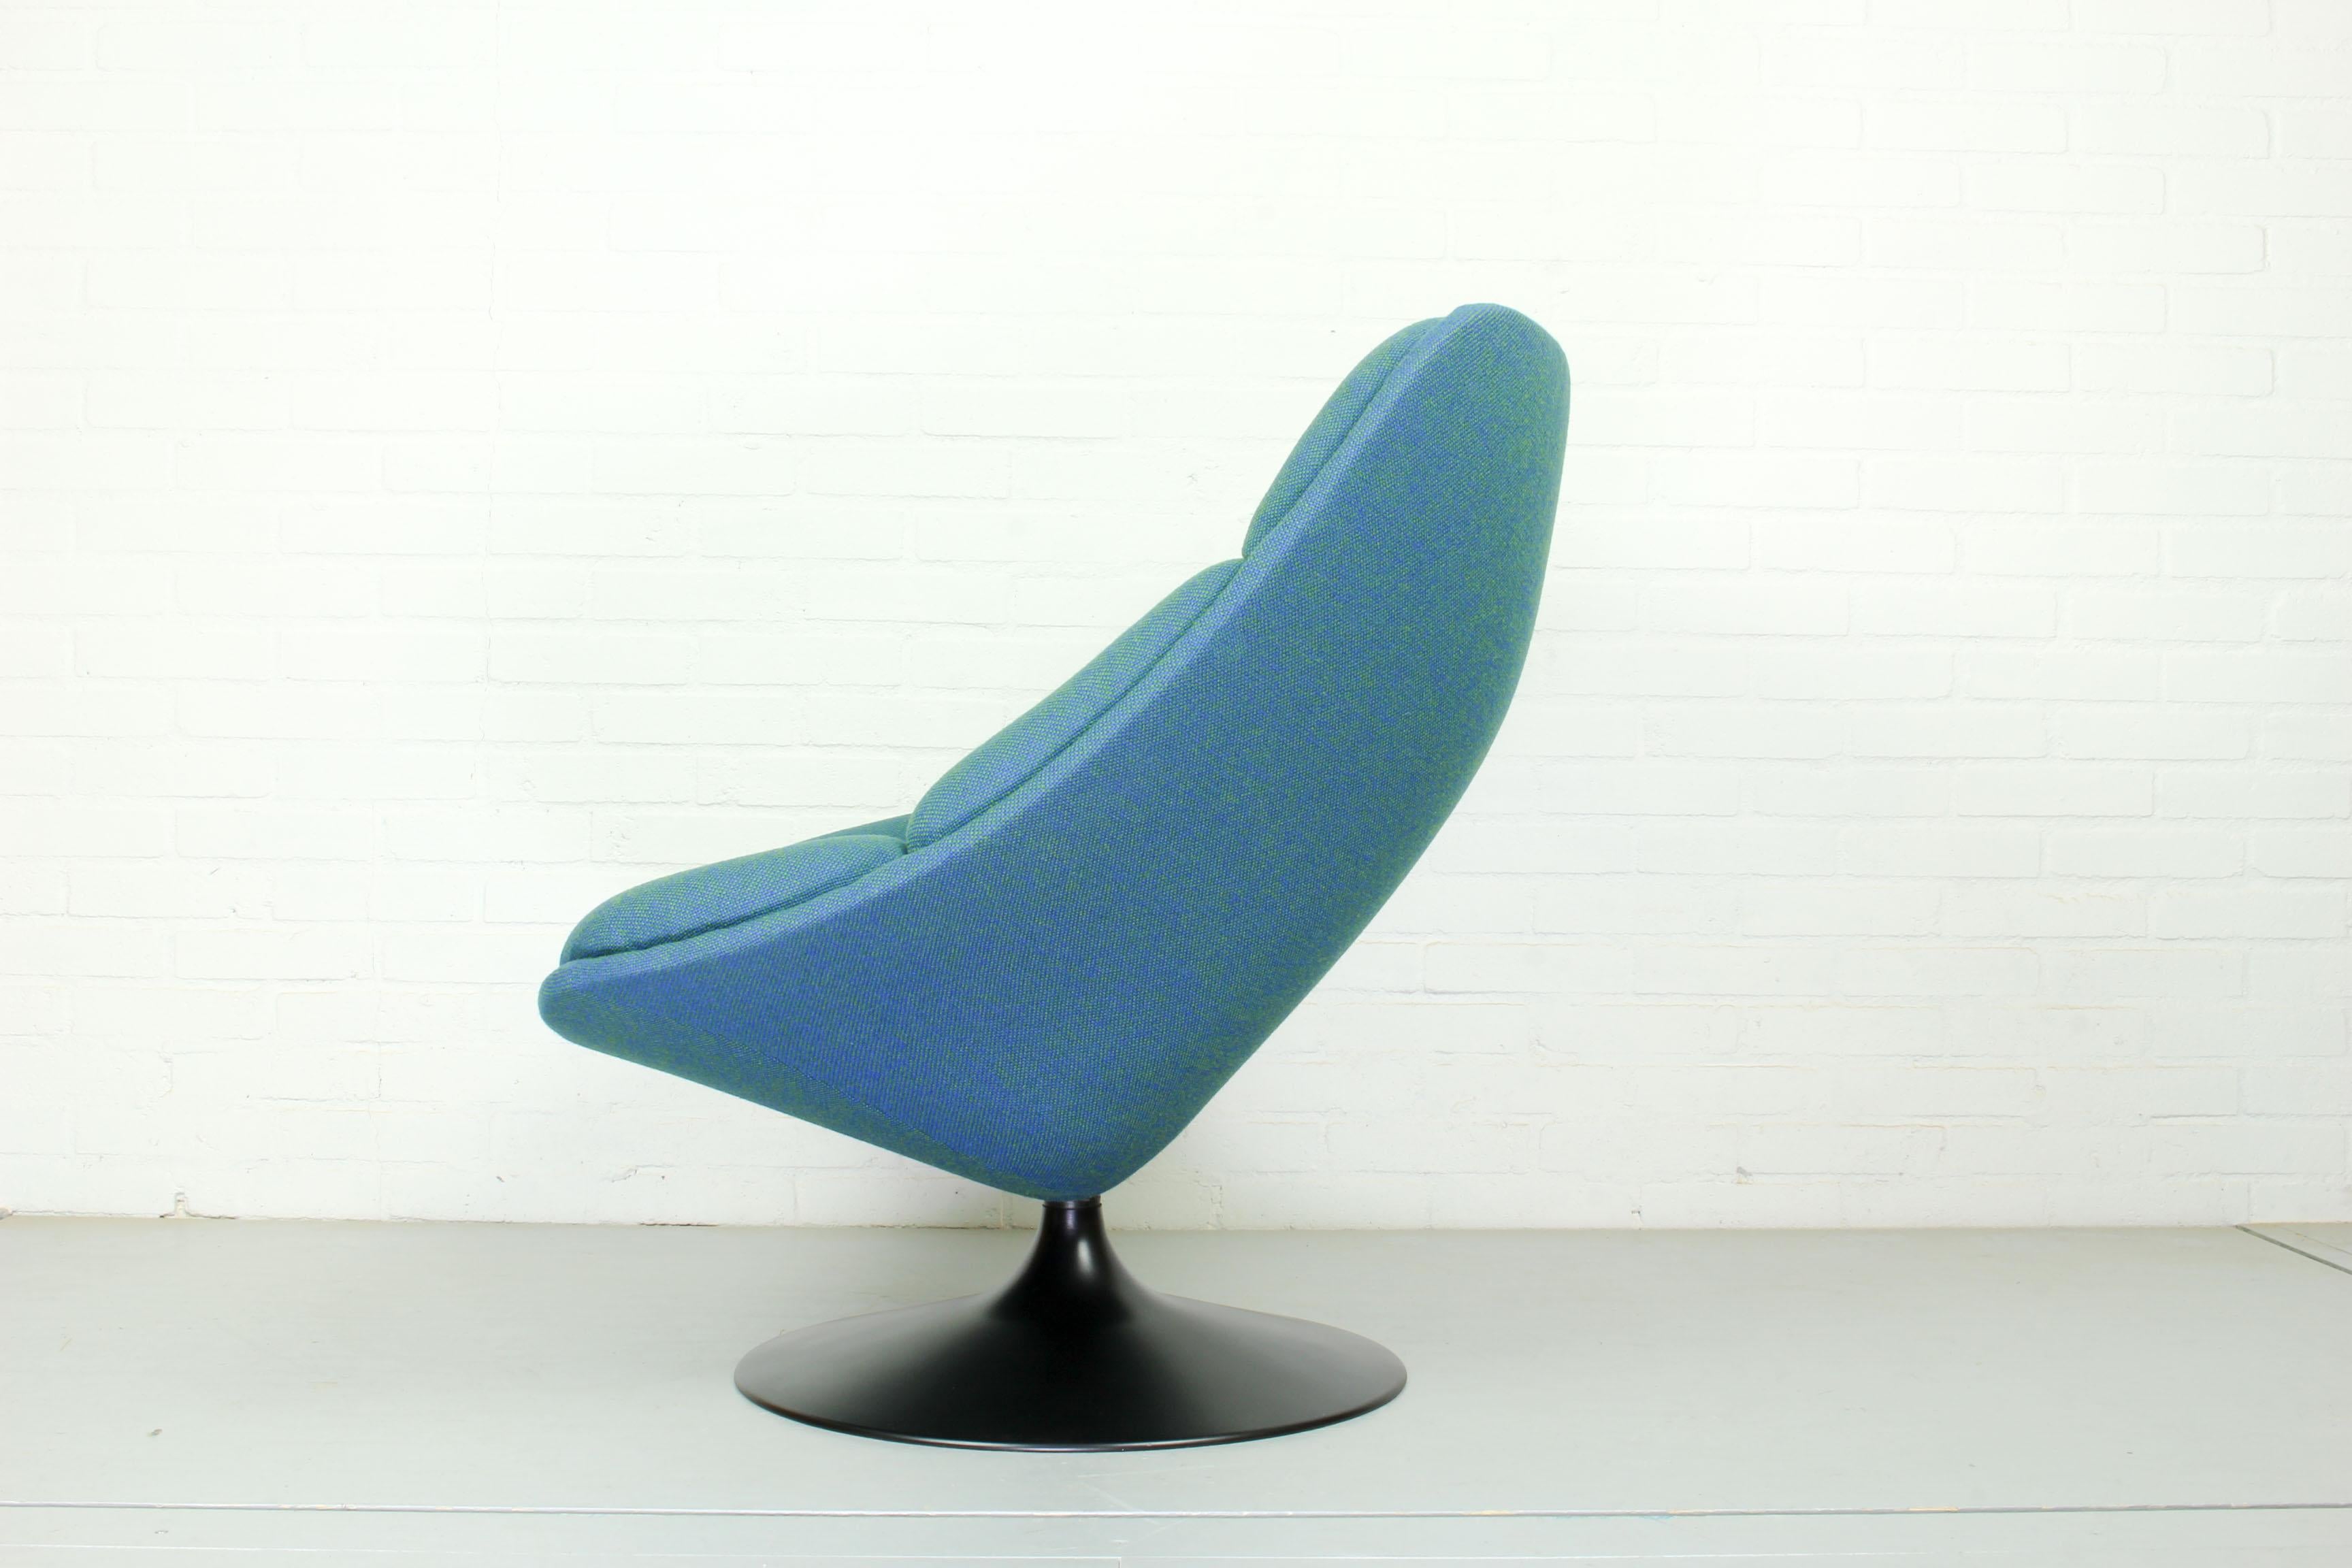 Lounge chair by Pierre Paulin for Artifort swivel armchair type F557, quite rare. Produced from 1961- 1965. This rather unique chair has a beautiful design. The chair has been reupholstered with blue/green Kvadrat Hallingdal (and has new foam). In